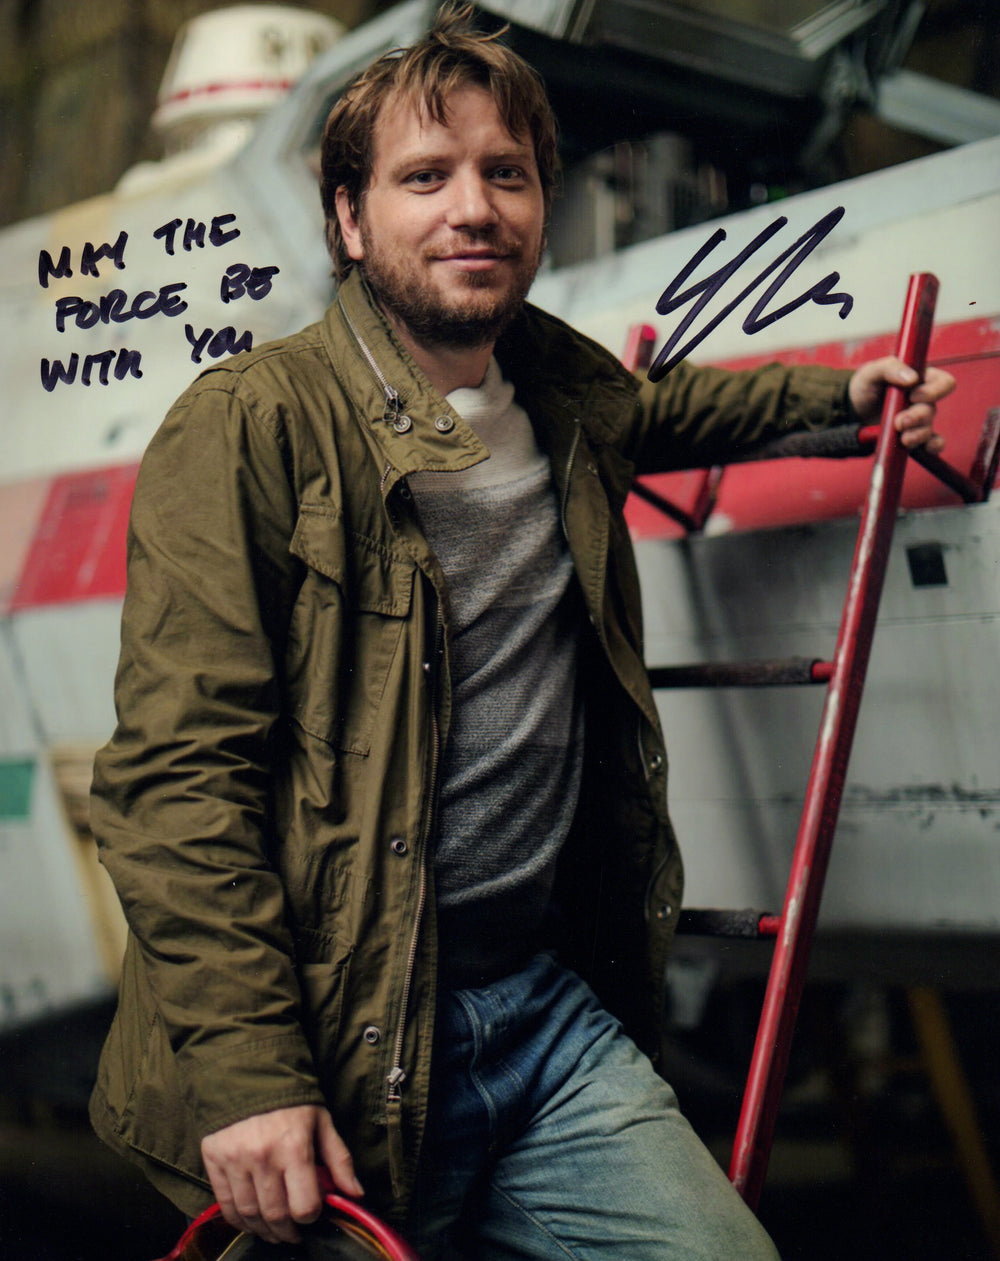 Gareth Edwards Director of Rogue One: A Star Wars Story Signed 8x10 Photo with 